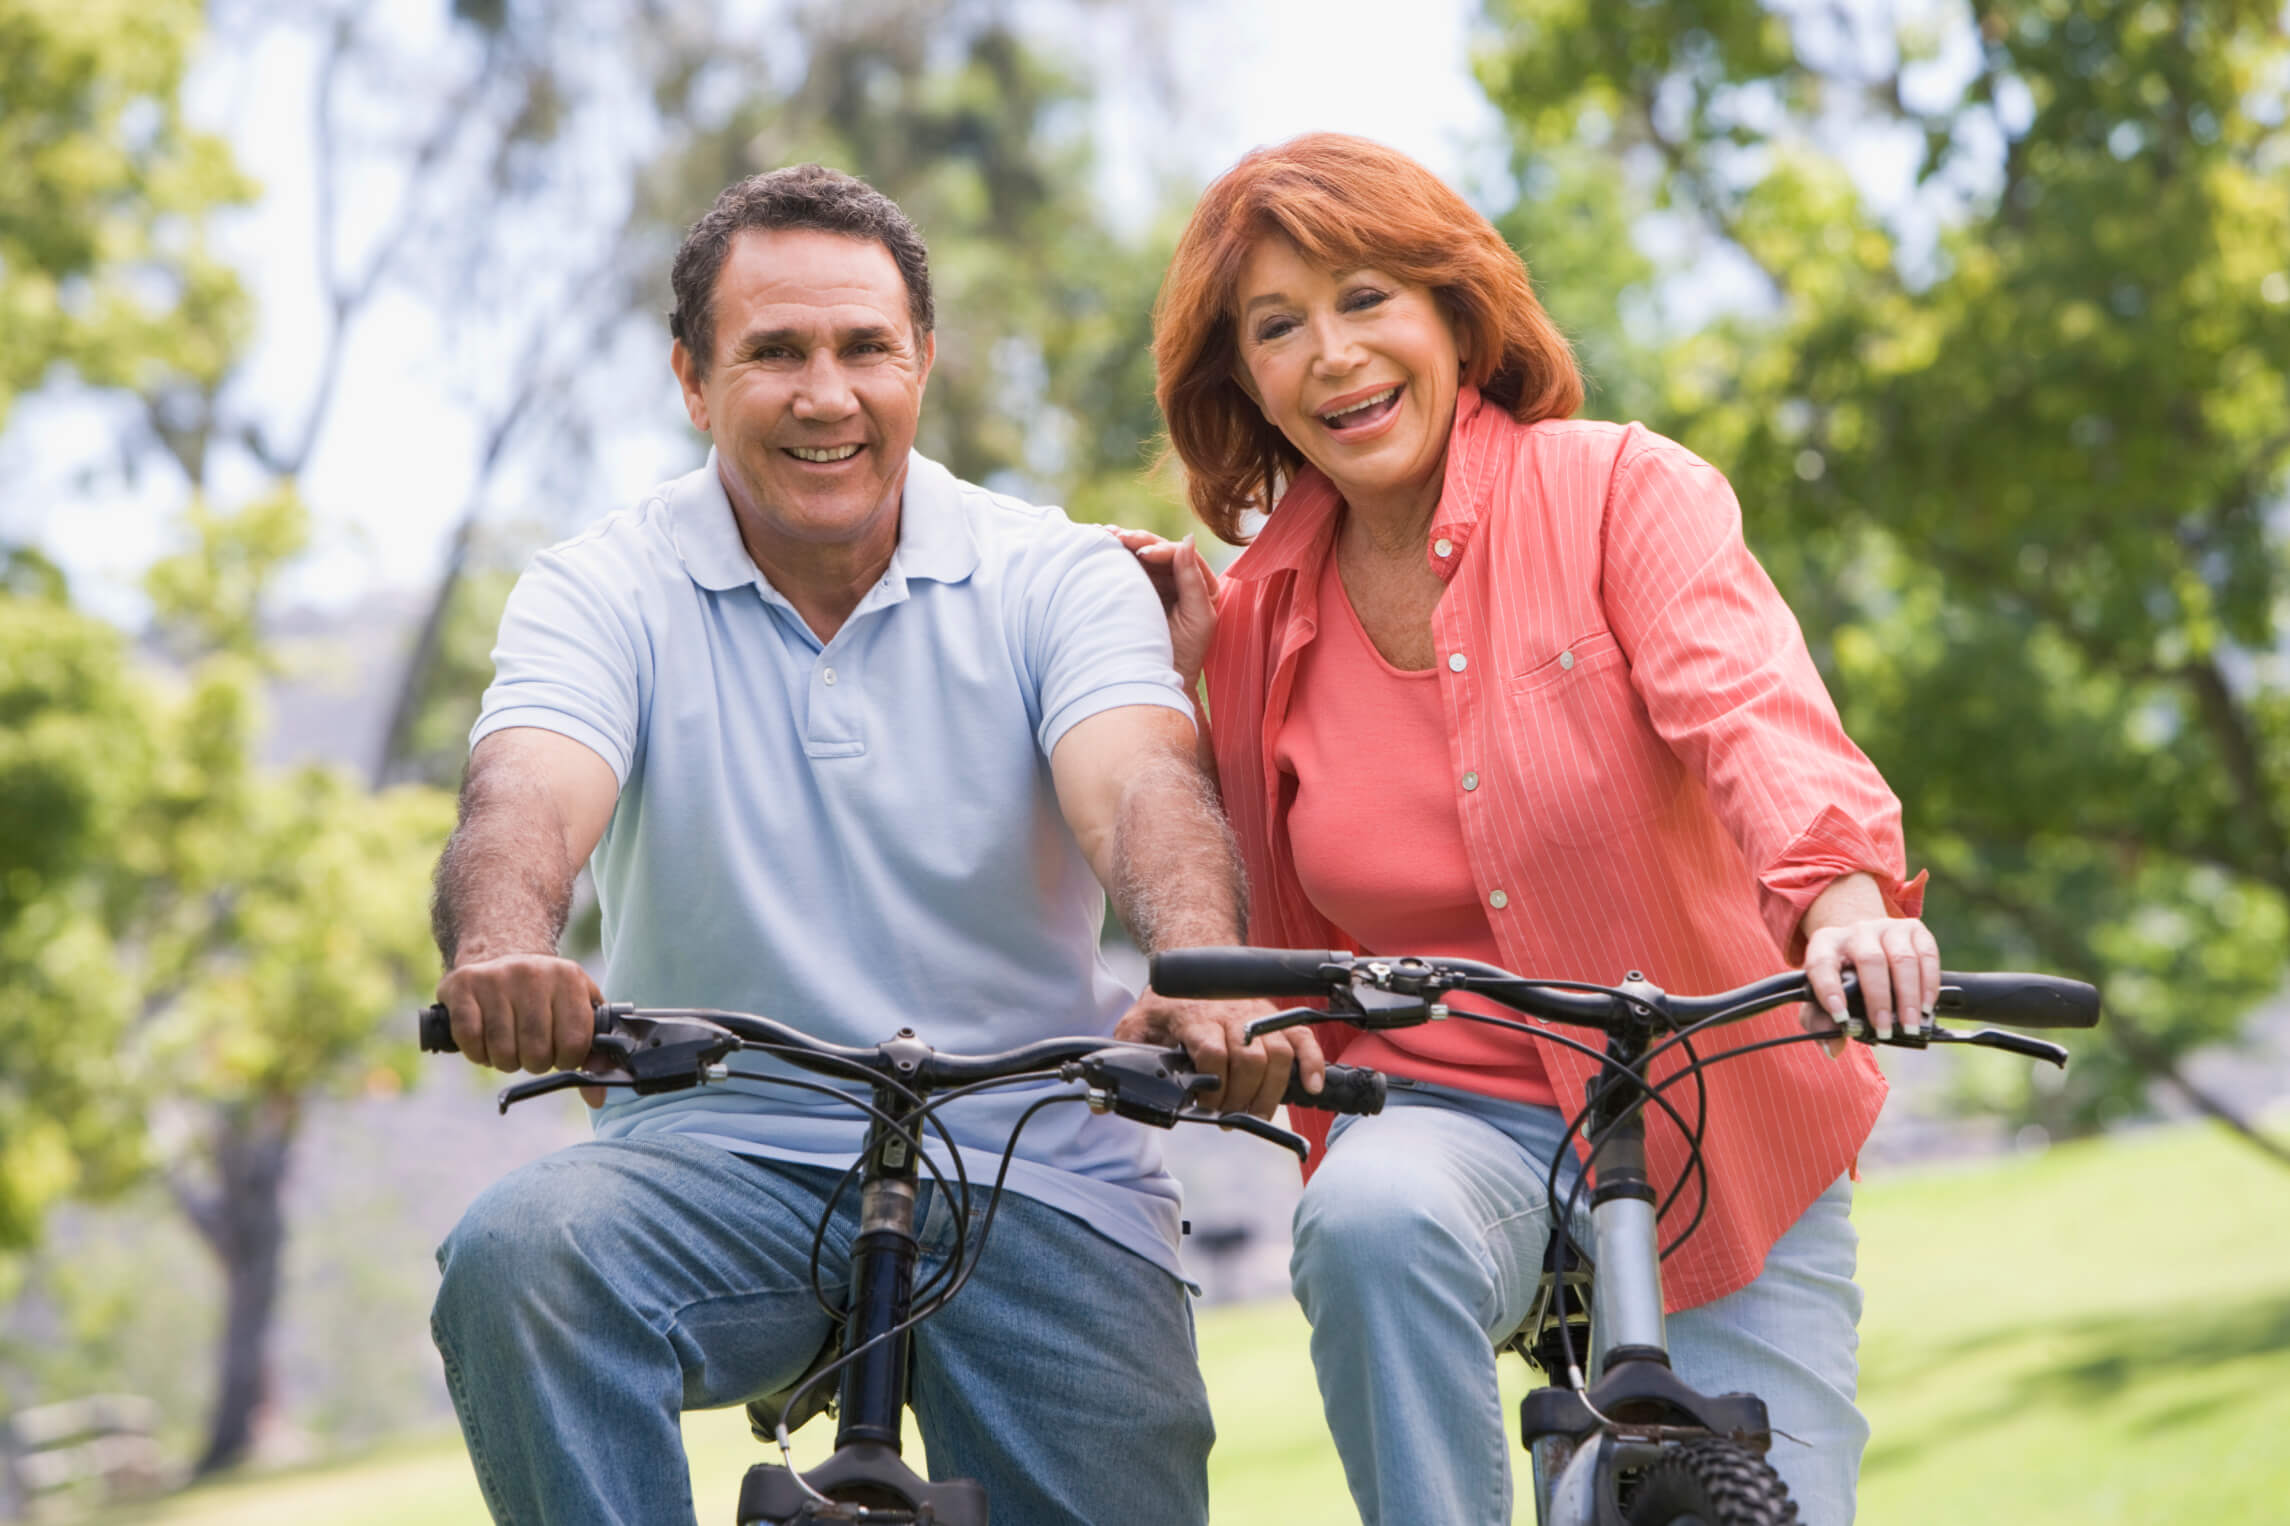 Stay active in retirement